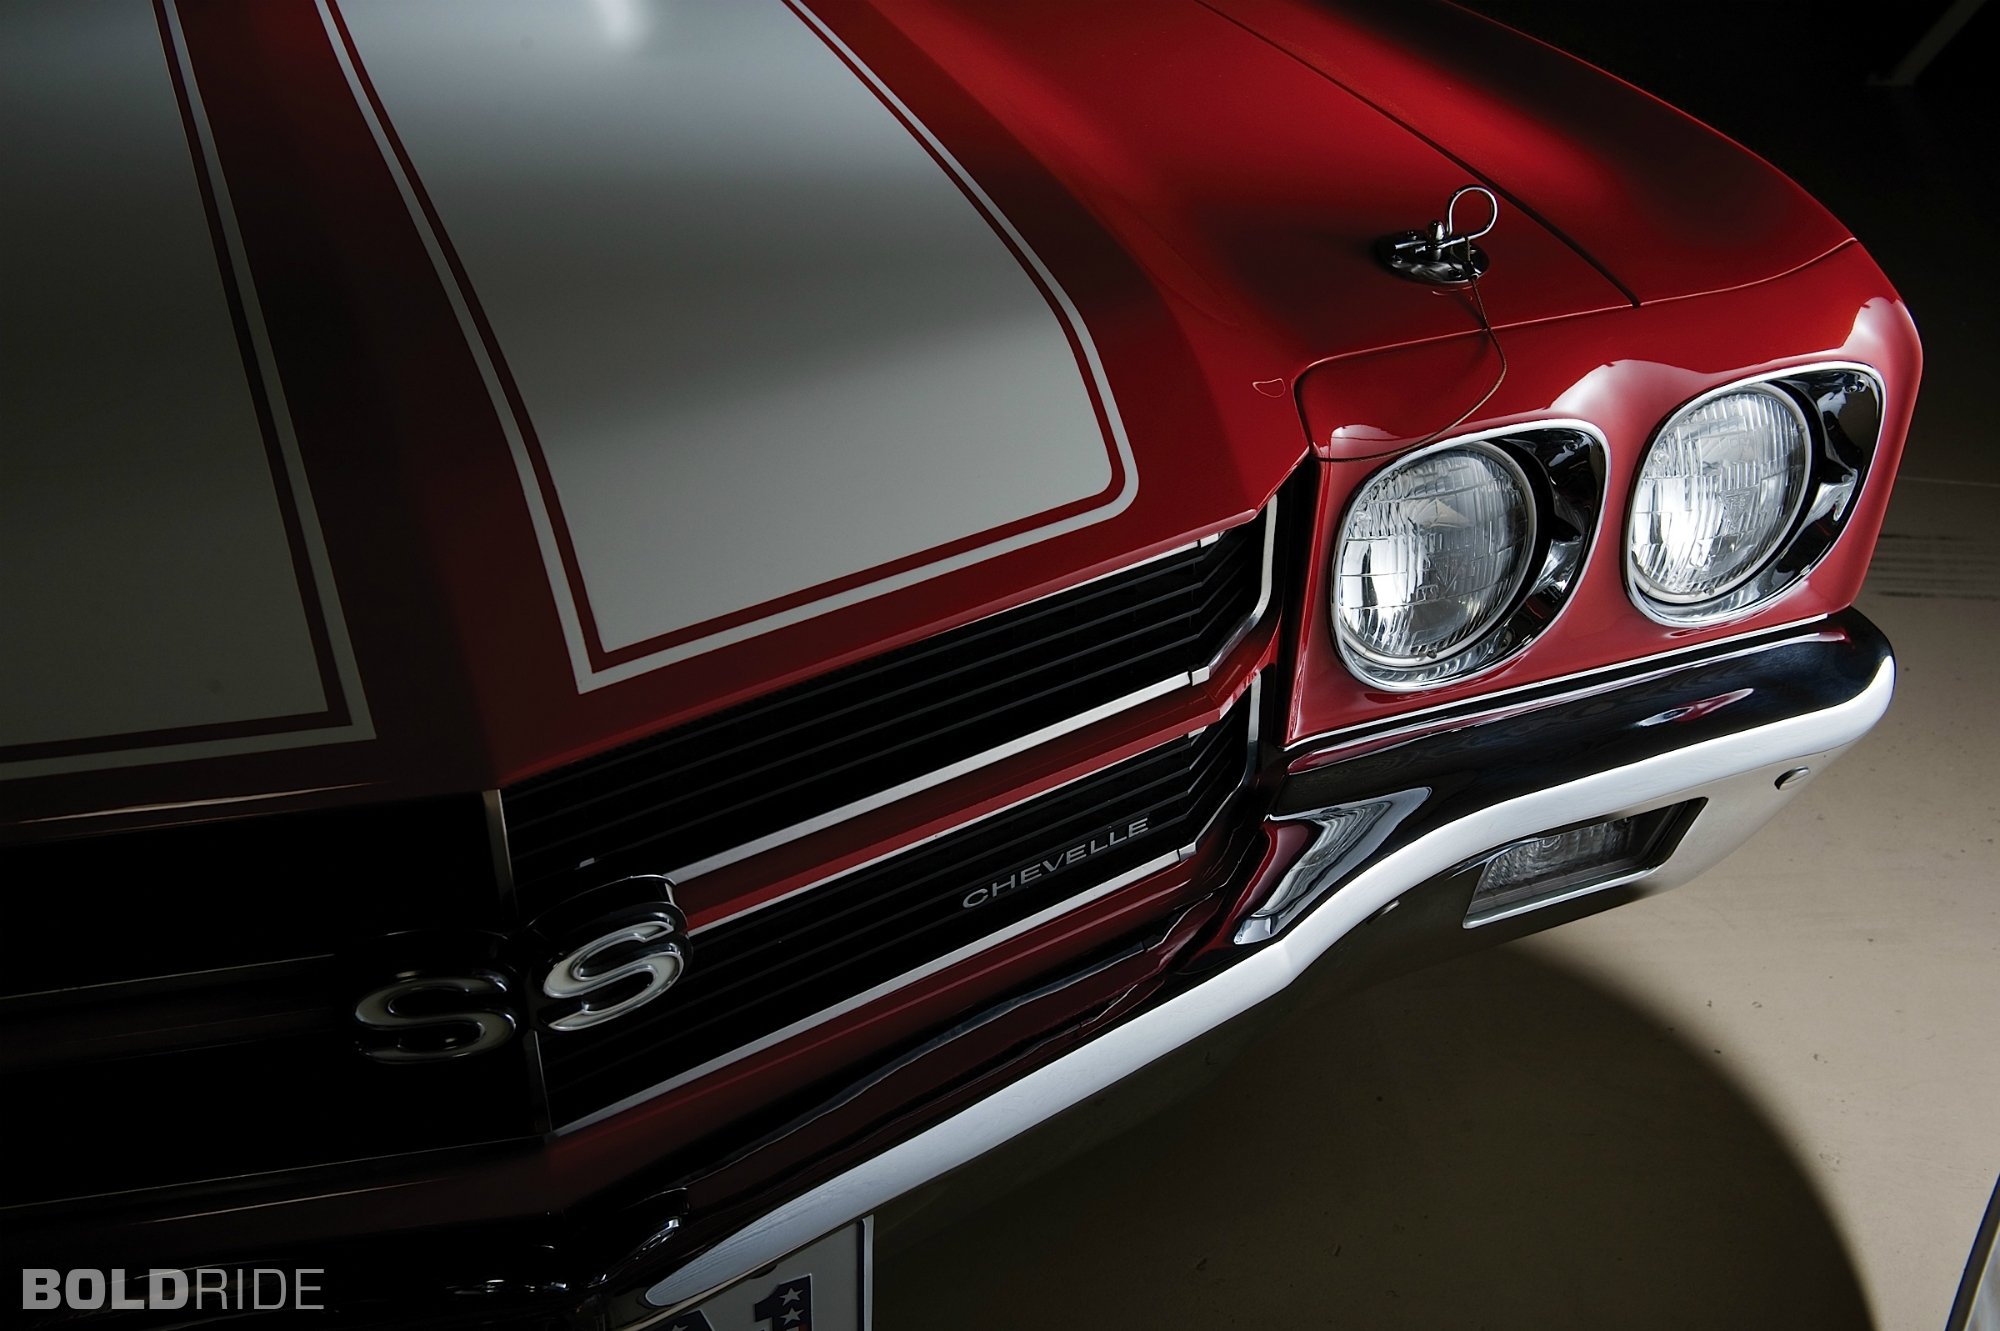 1970 Chevelle Ss Black Wallpaper Images Pictures   Becuo